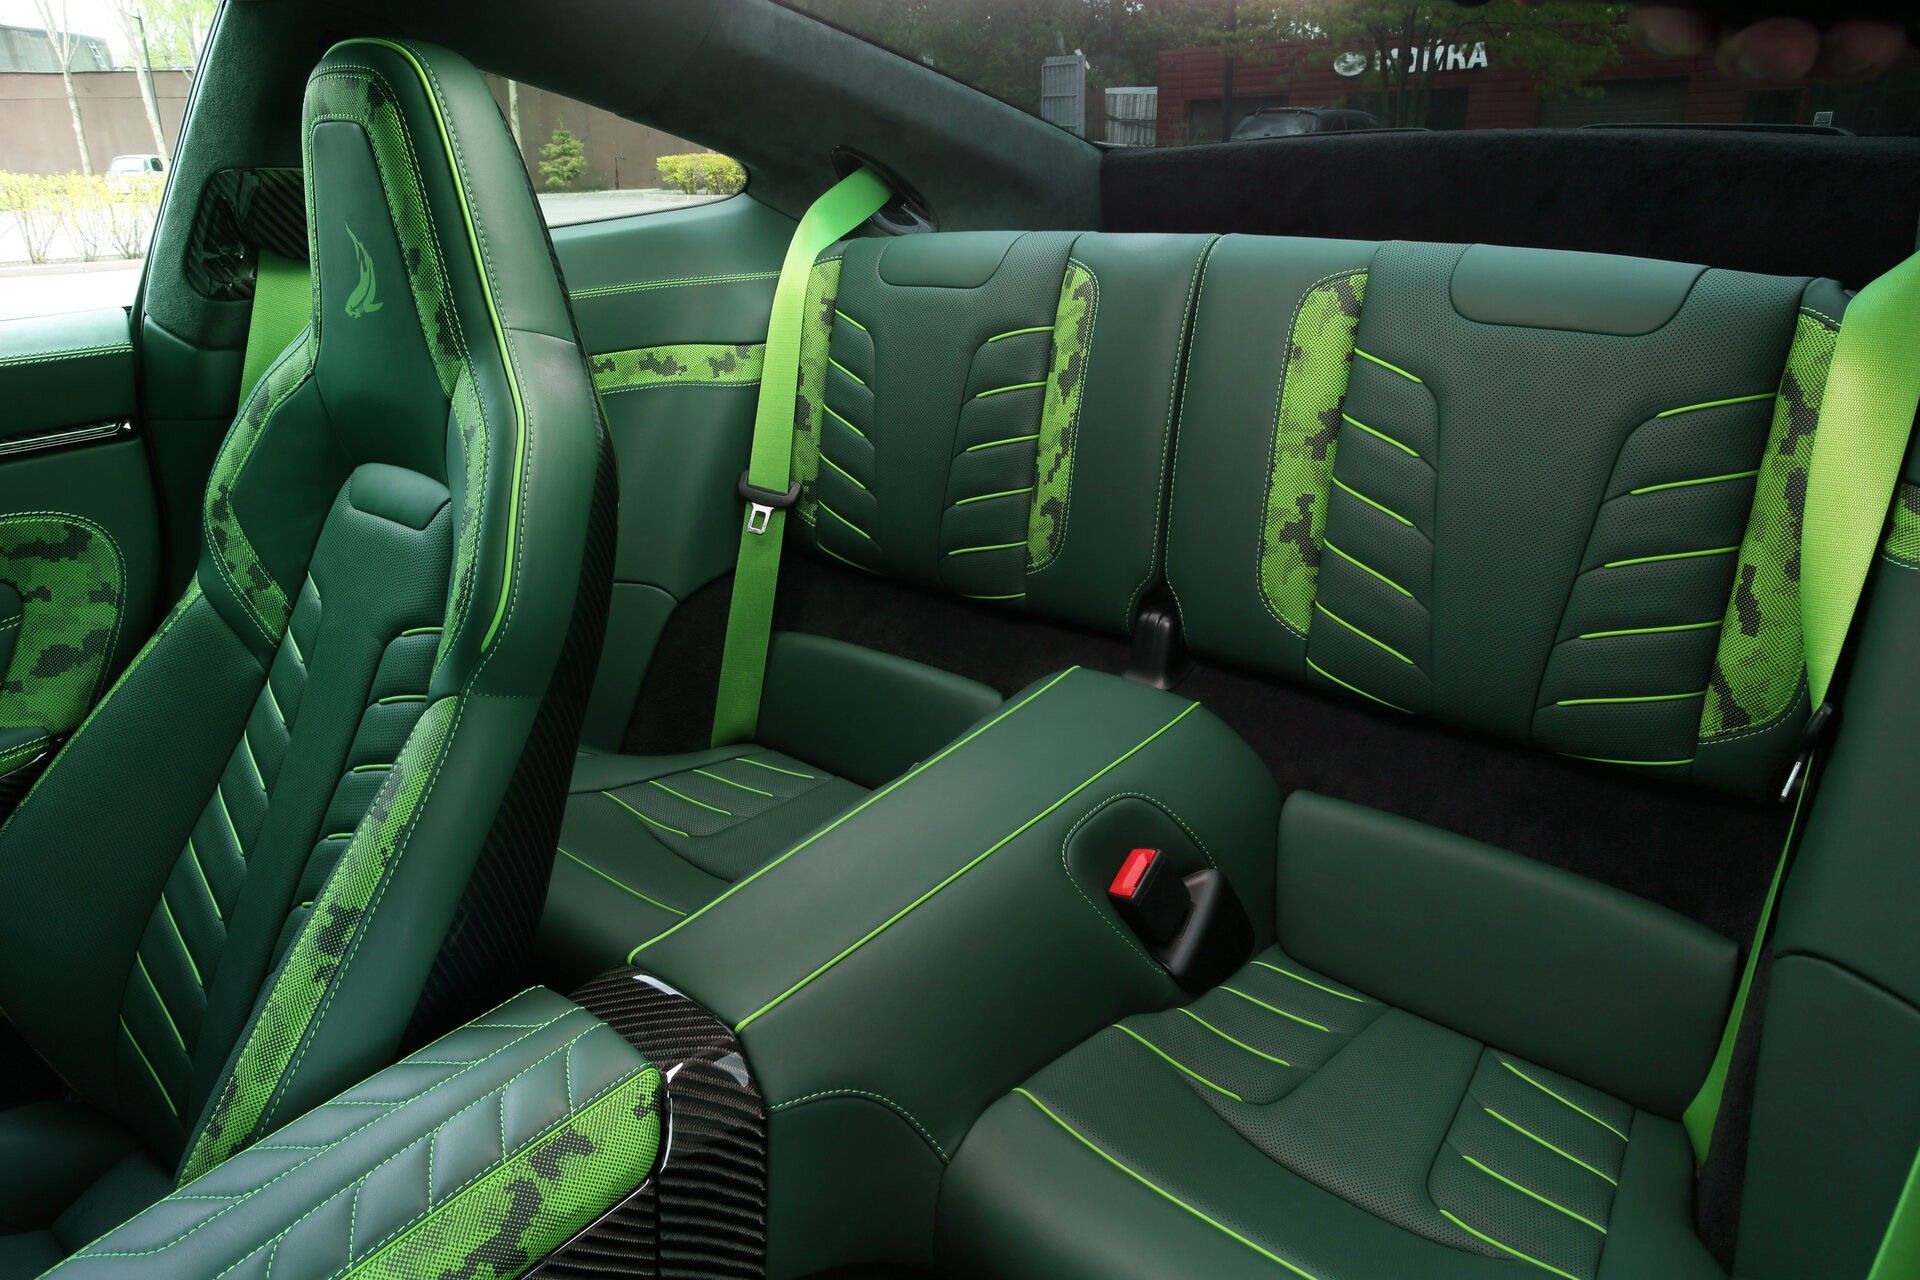 TopCar Gives The Porsche 911 Turbo S A Stunning Green Carbon Fiber Suit